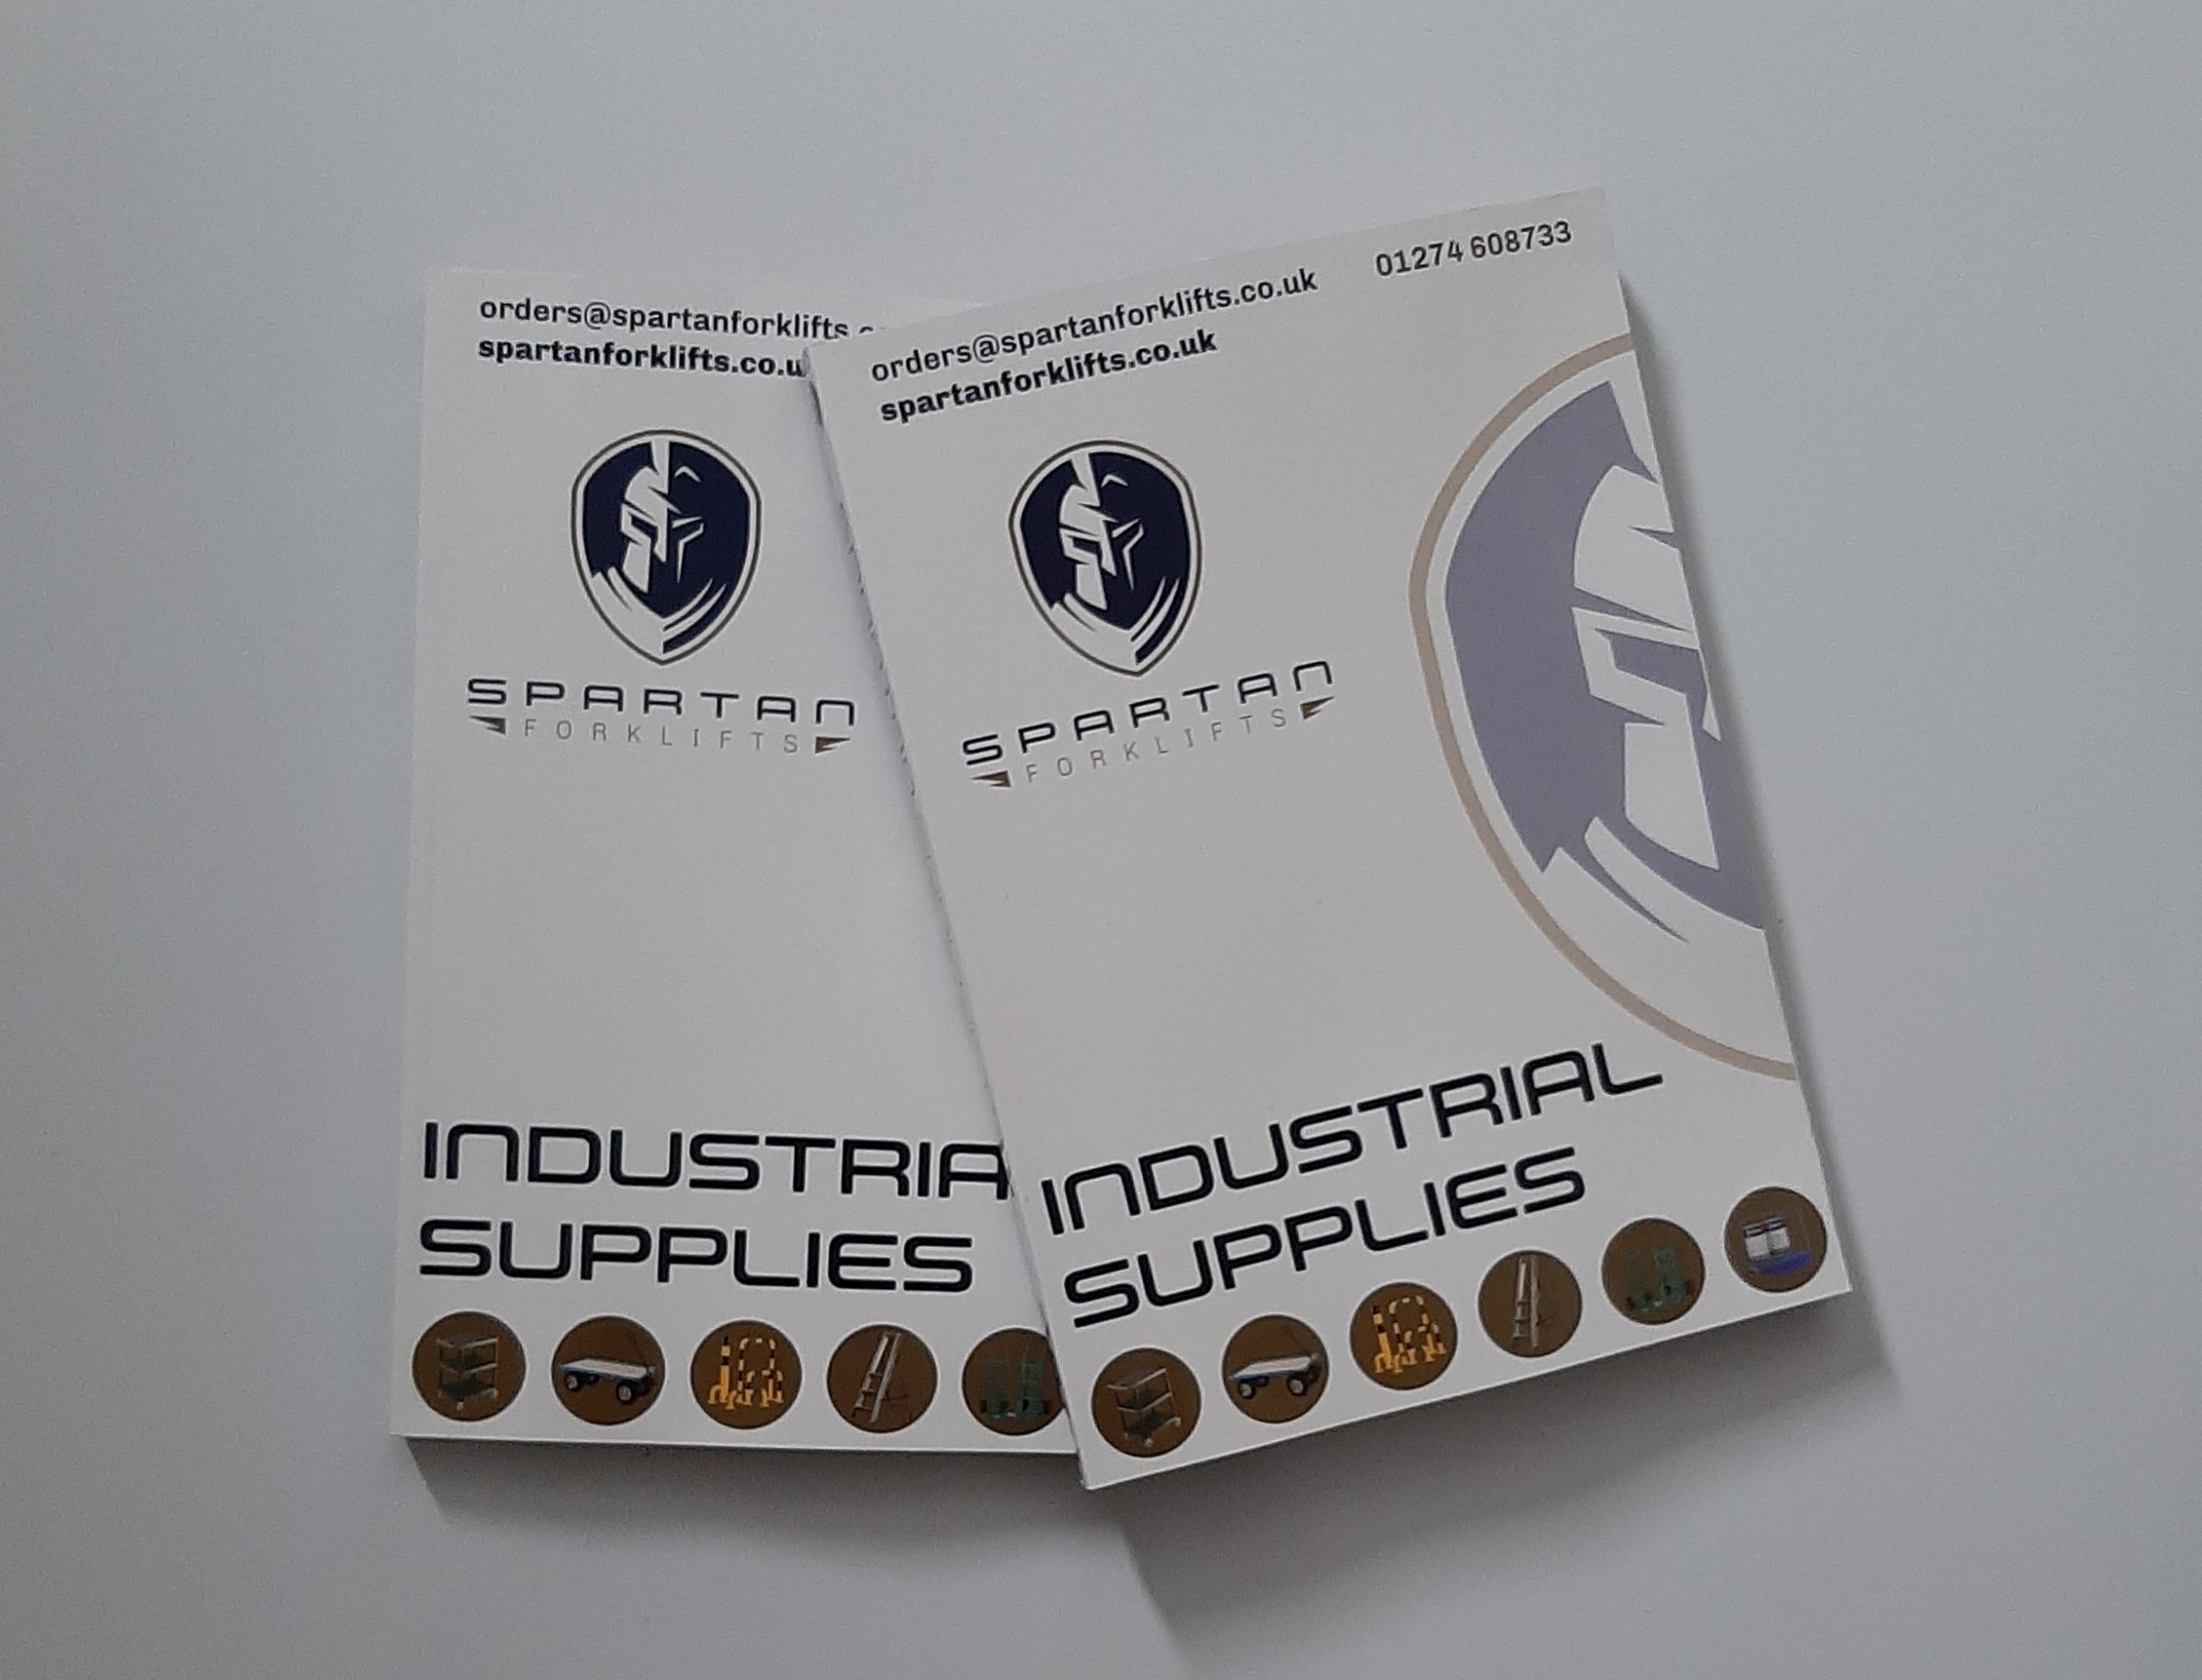 NEW – Our Industrial Supplies Catalogue is now available!